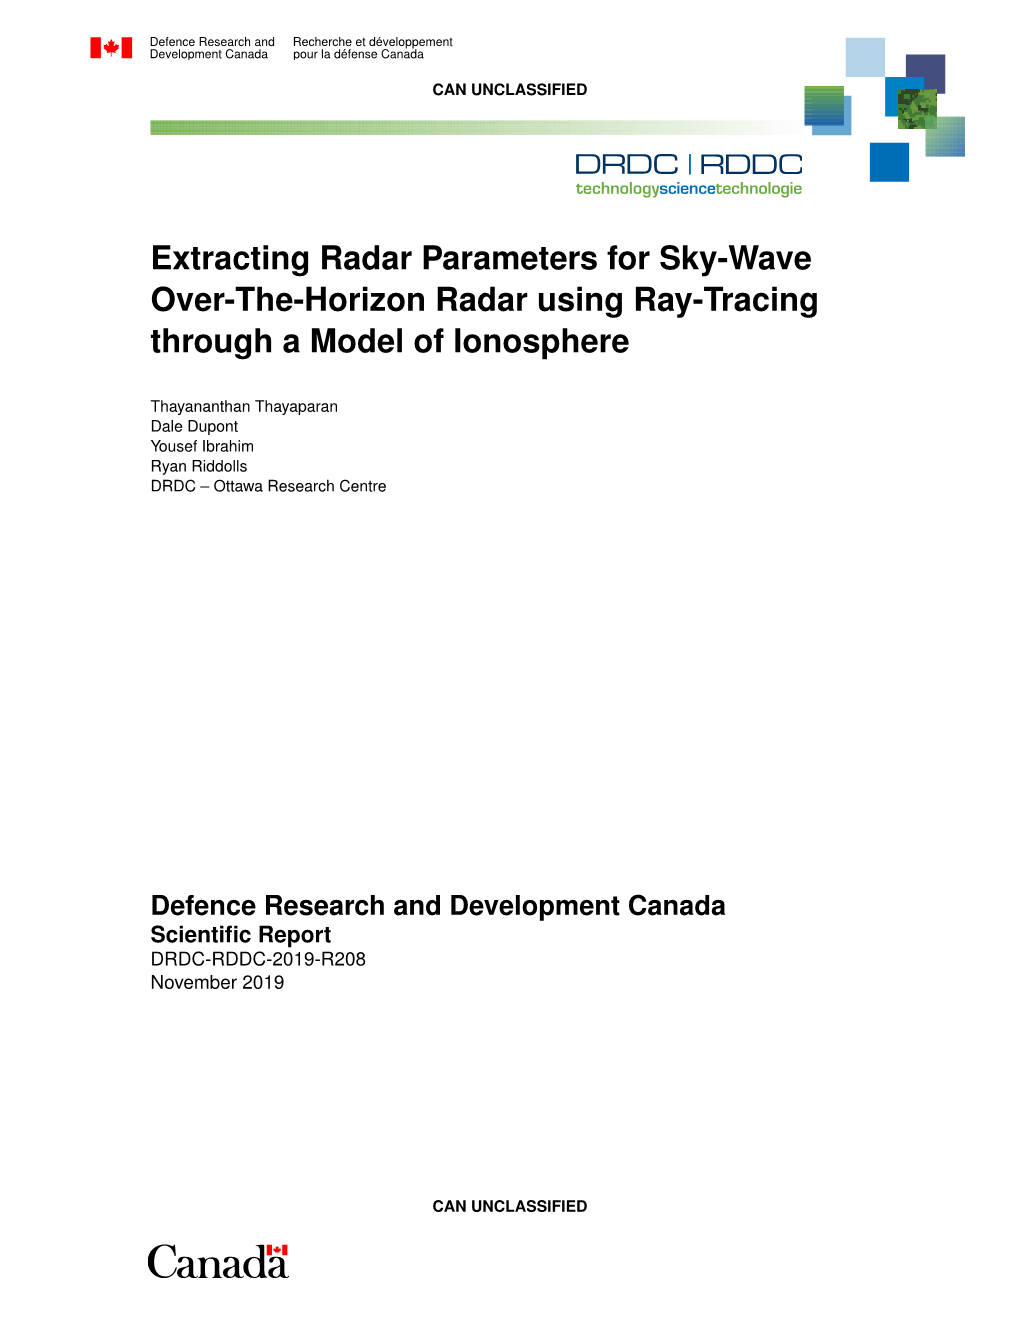 Extracting Radar Parameters for Sky-Wave Over-The-Horizon Radar Using Ray-Tracing Through a Model of Ionosphere